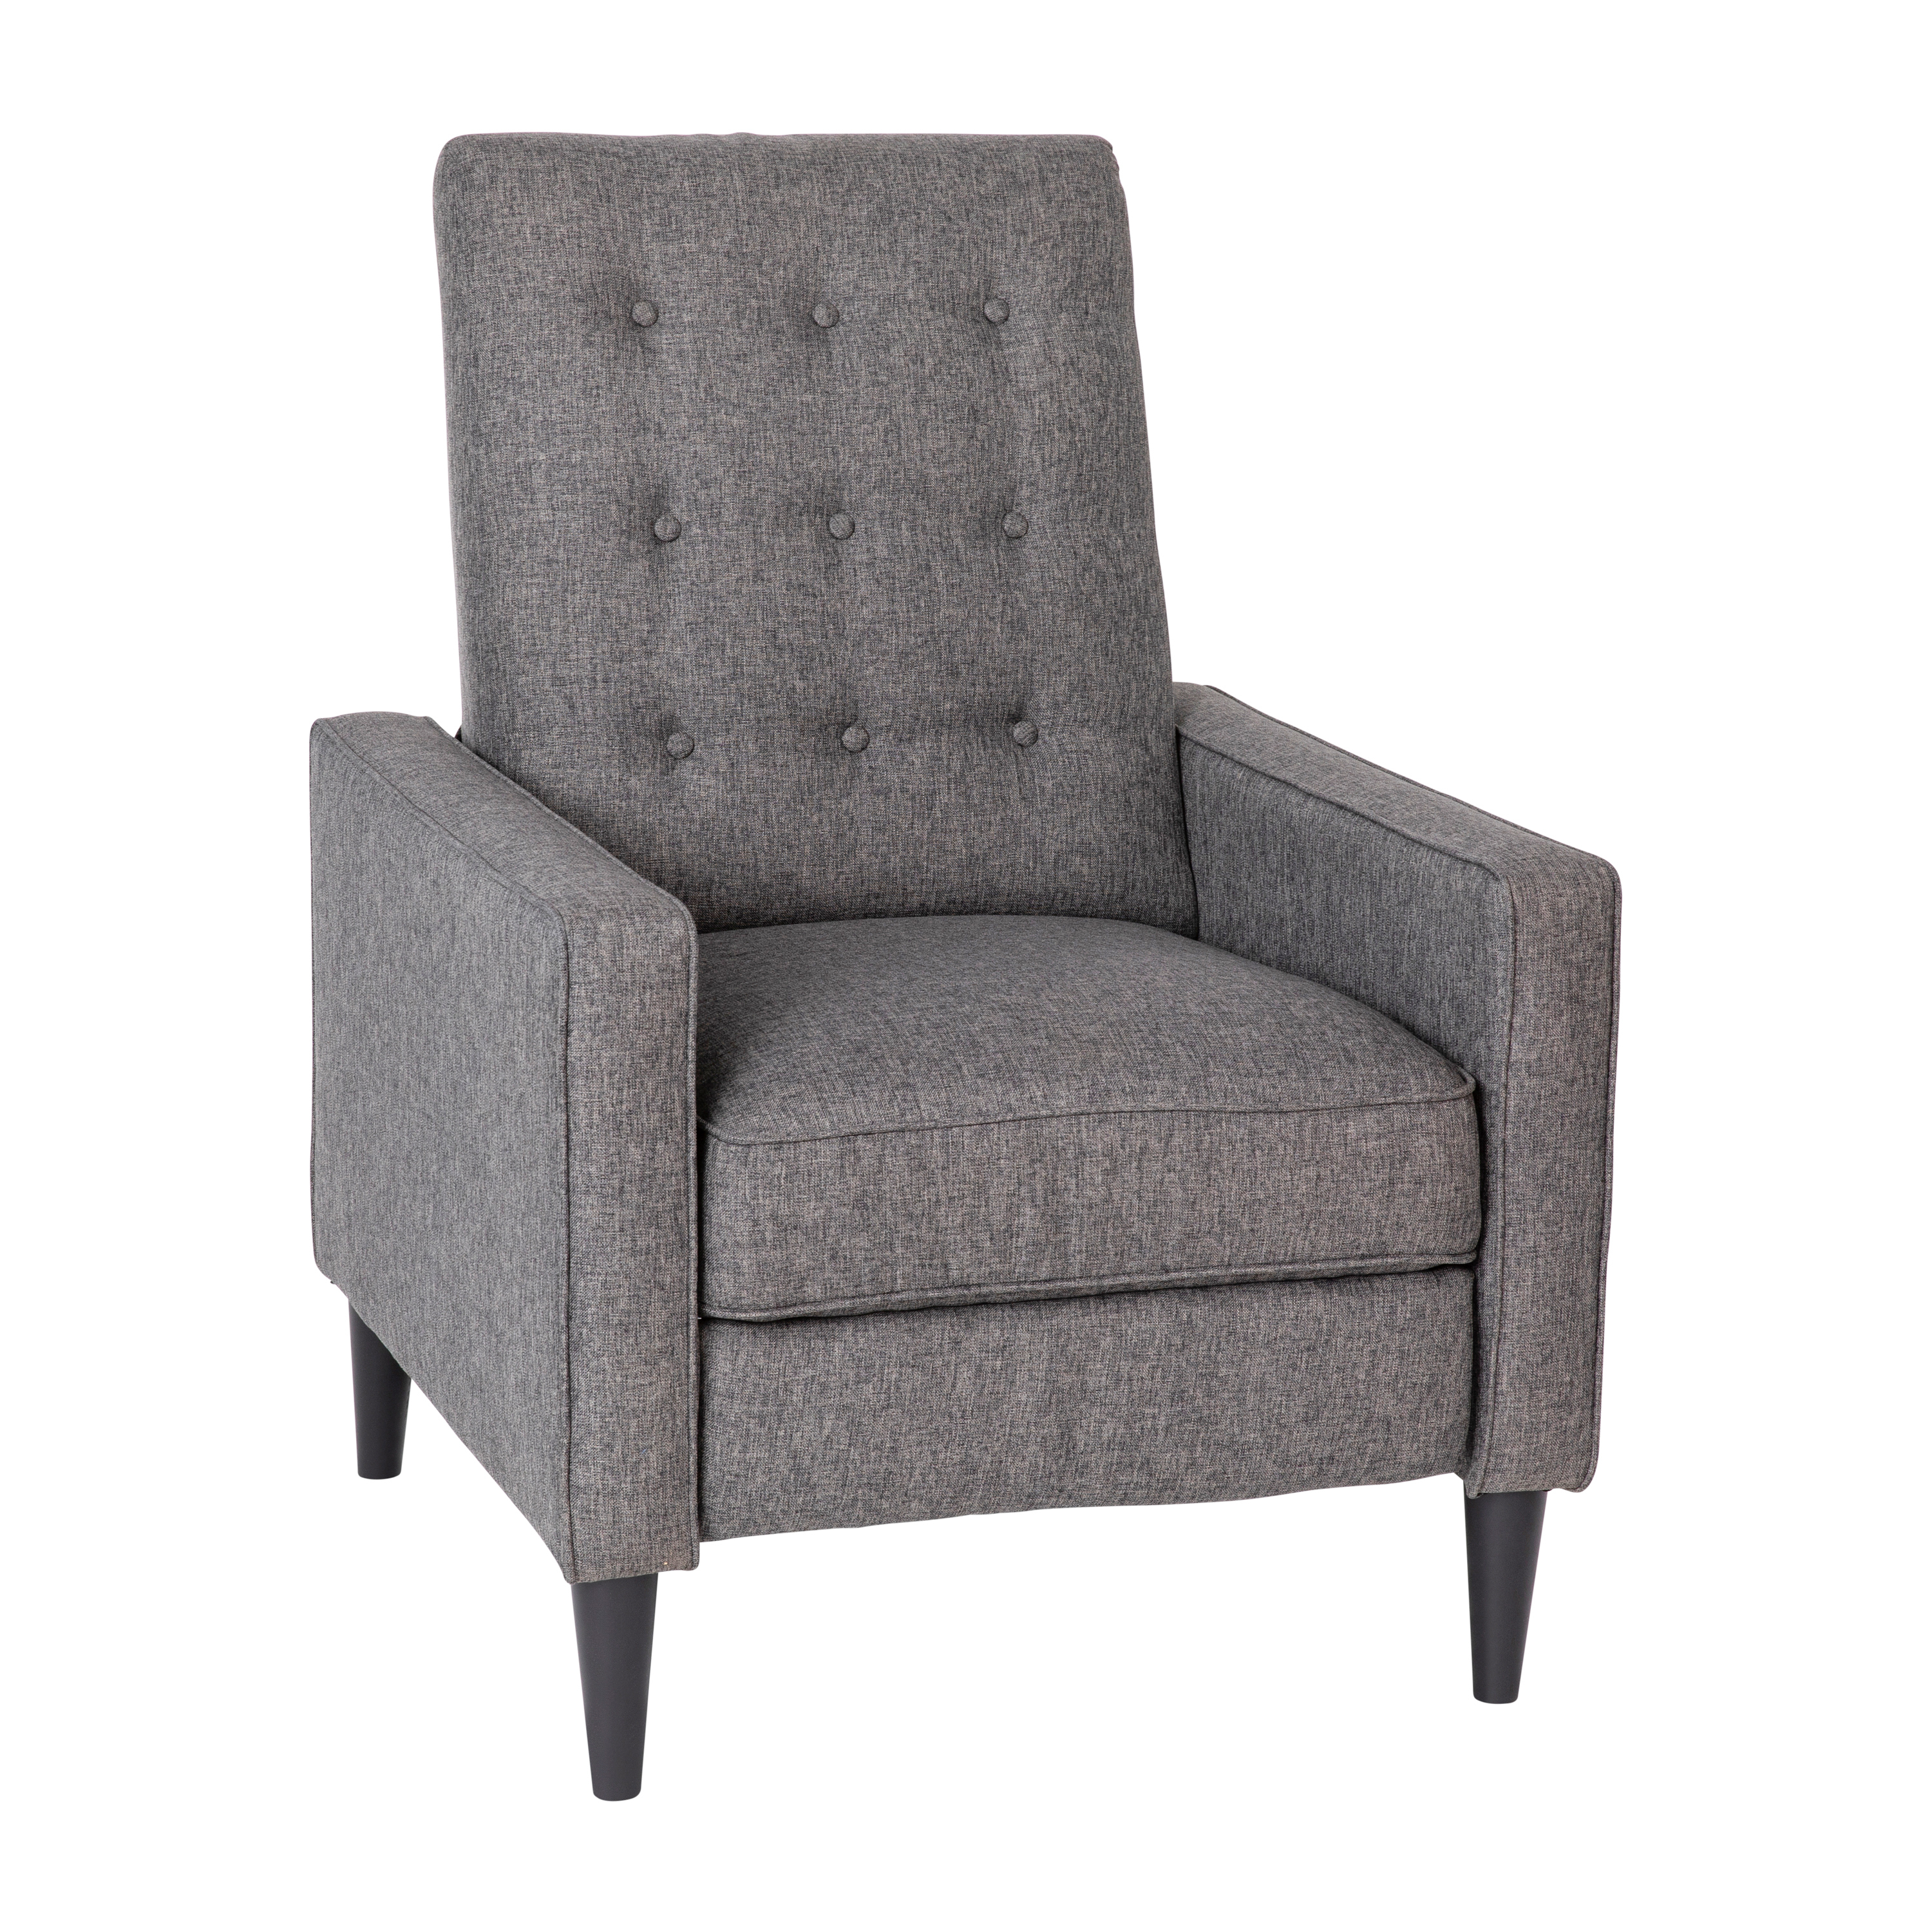 Flash Furniture SG-SX-80415N-GY-GG Mid-Century Modern Gray Fabric Button Tufted Pushback Recliner